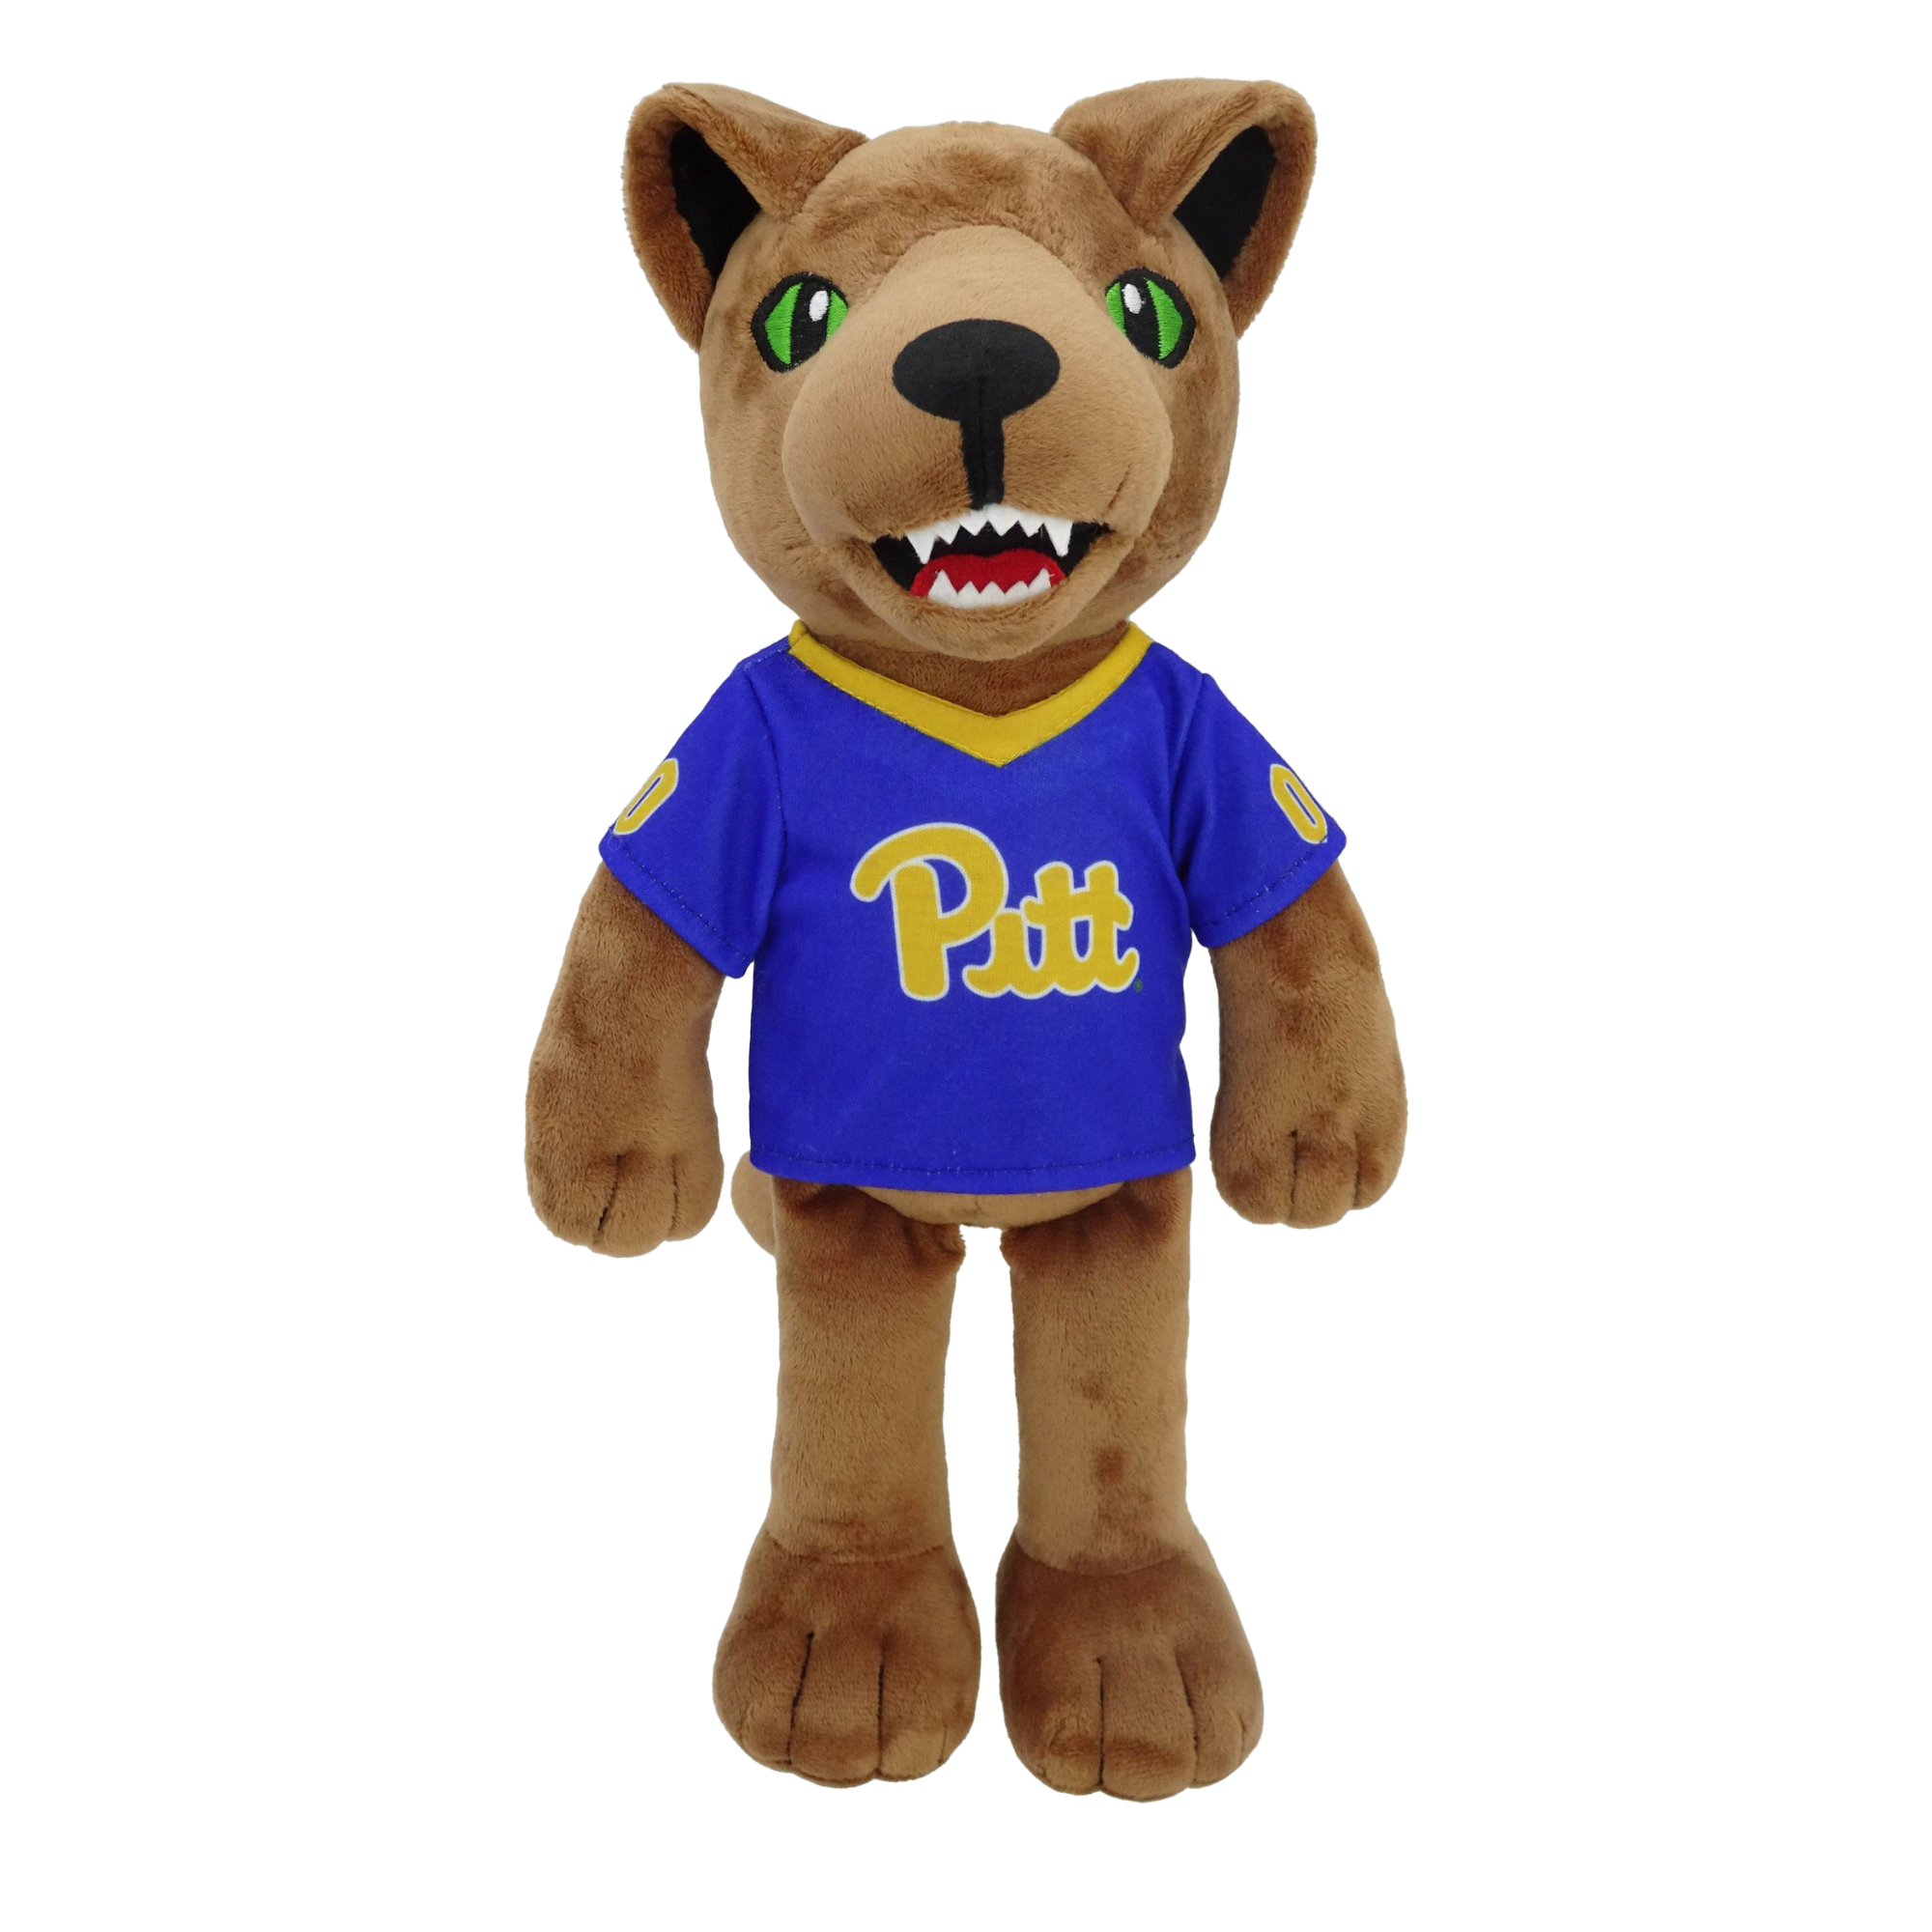 University of Pittsburgh Roc The Panther 14” Plush Figure